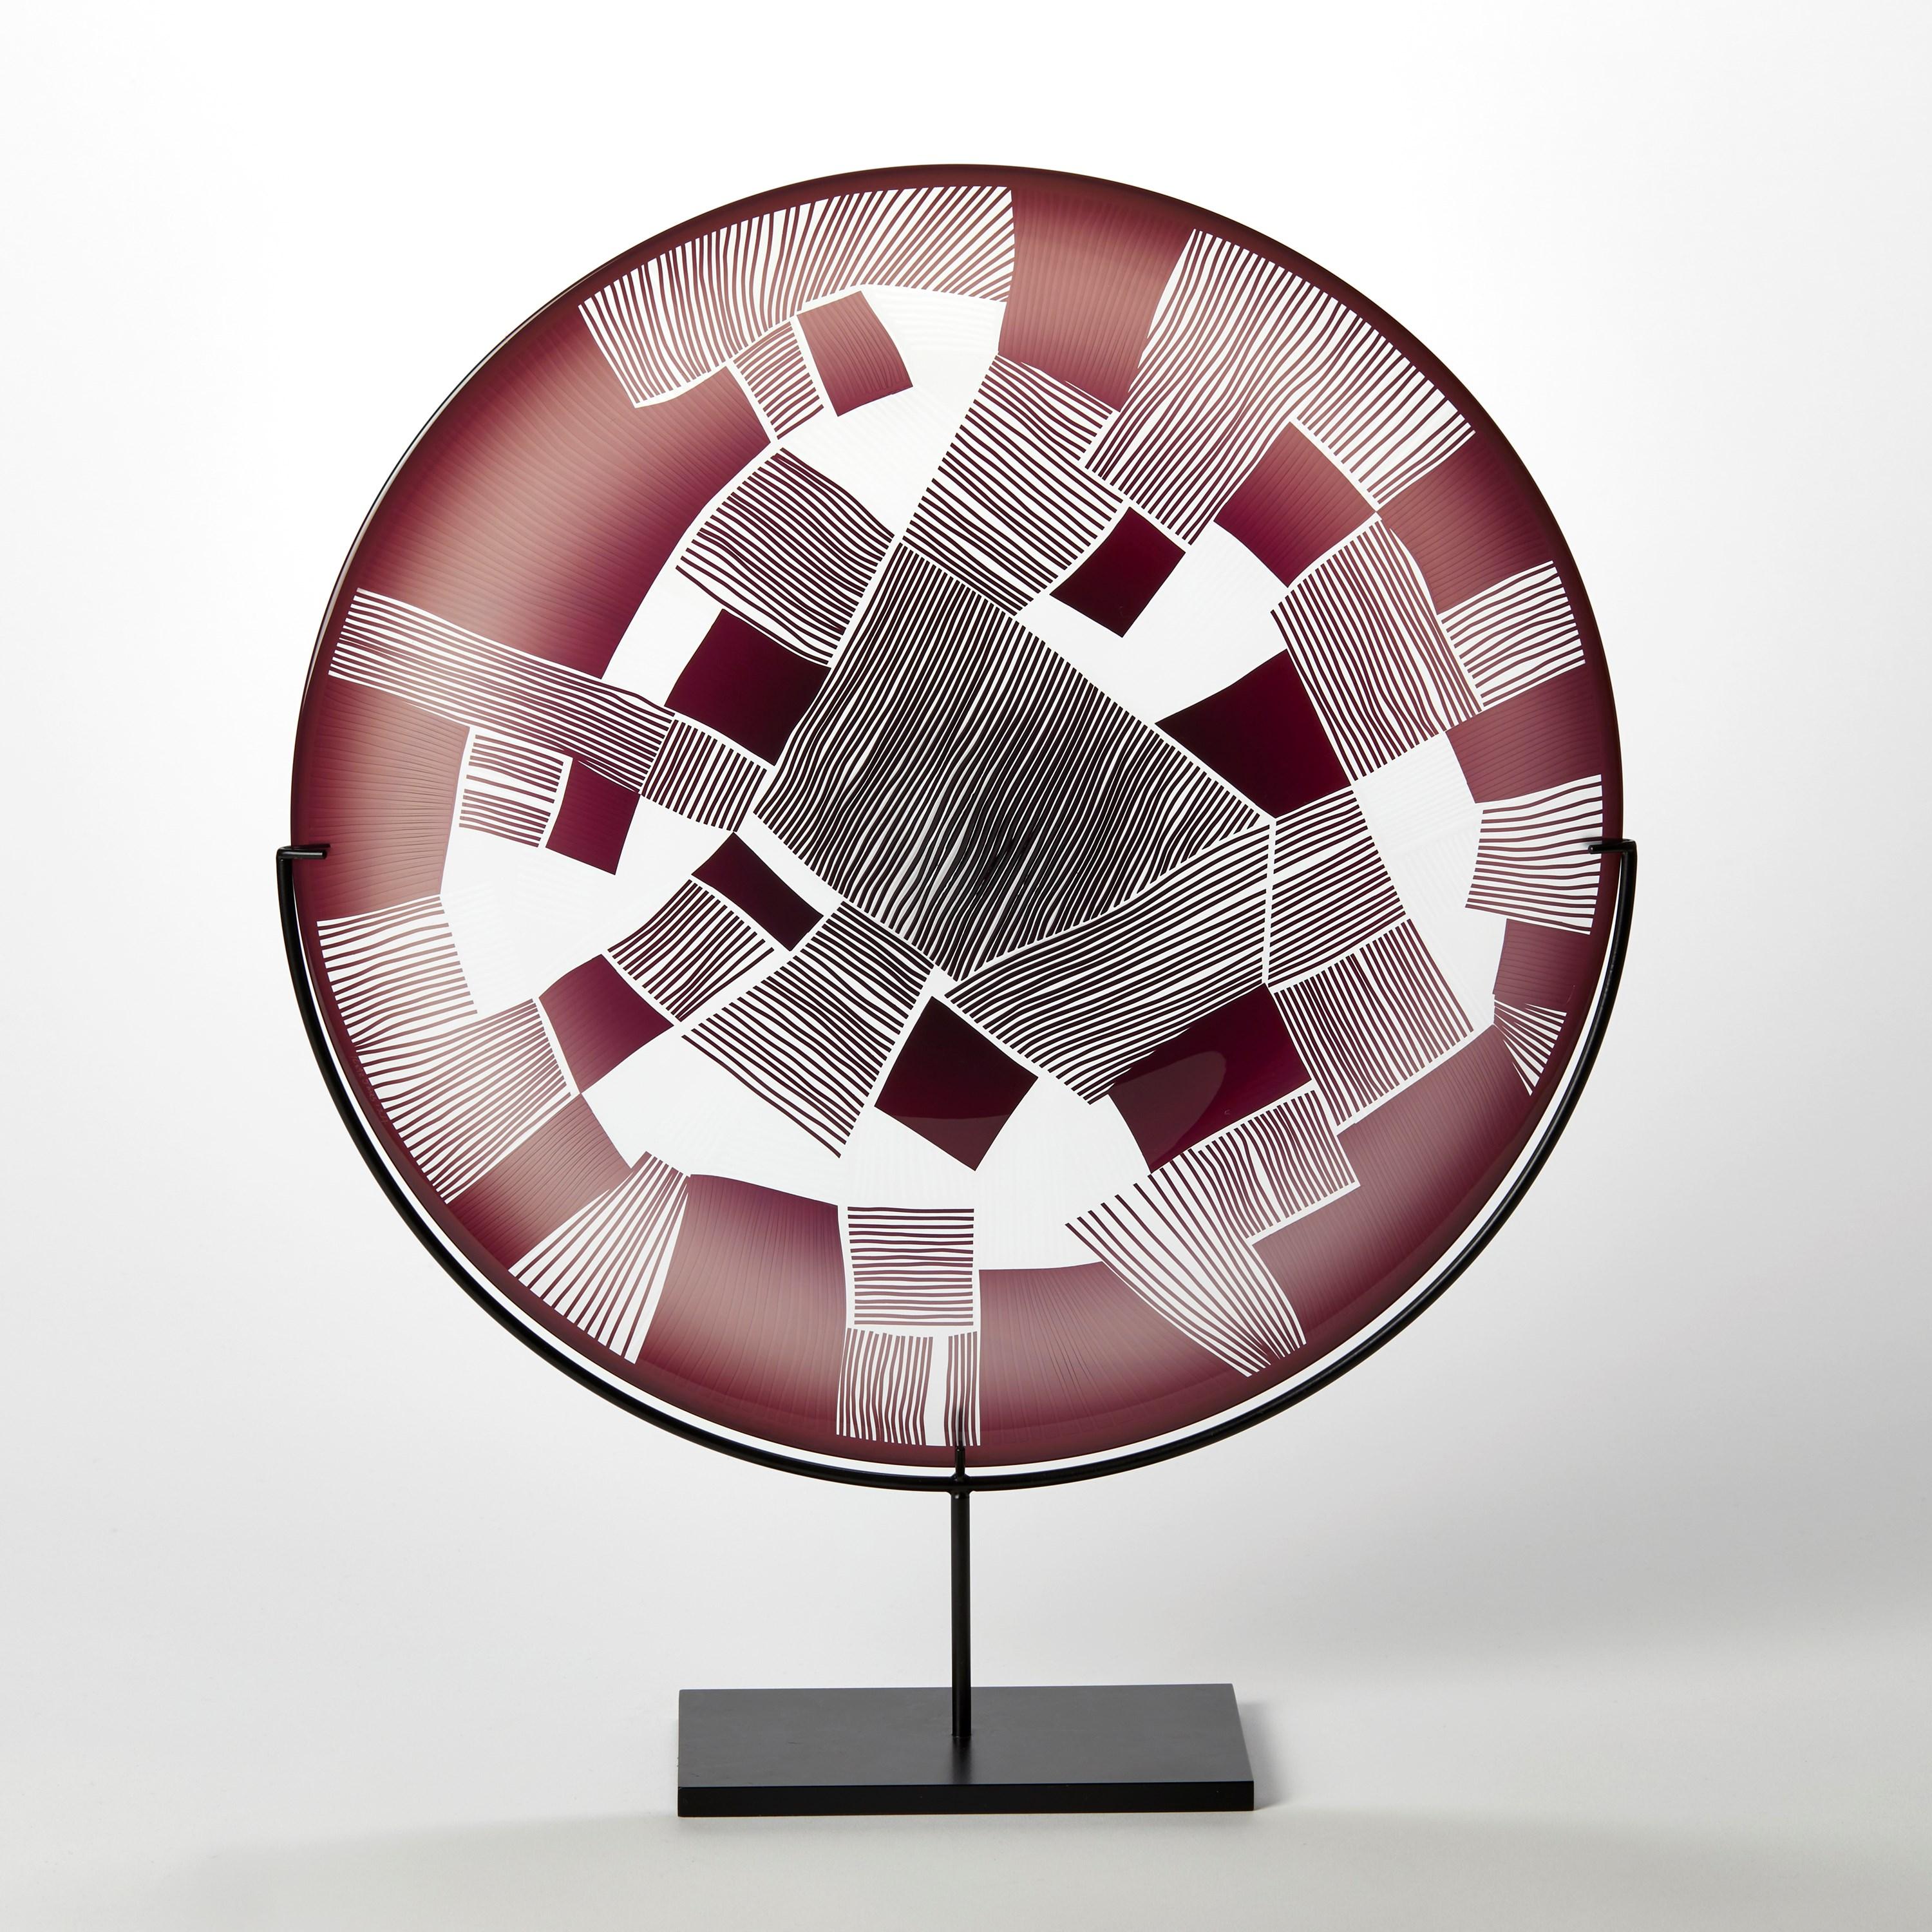 'Abstracted Land Ruby Red' is a unique handblown and cut glass artwork by the British artist, Kate Jones of Gillies Jones.

Created with Stephen Gillies, with whom Jones makes many works in collaboration, these exquisite sculptural plates are